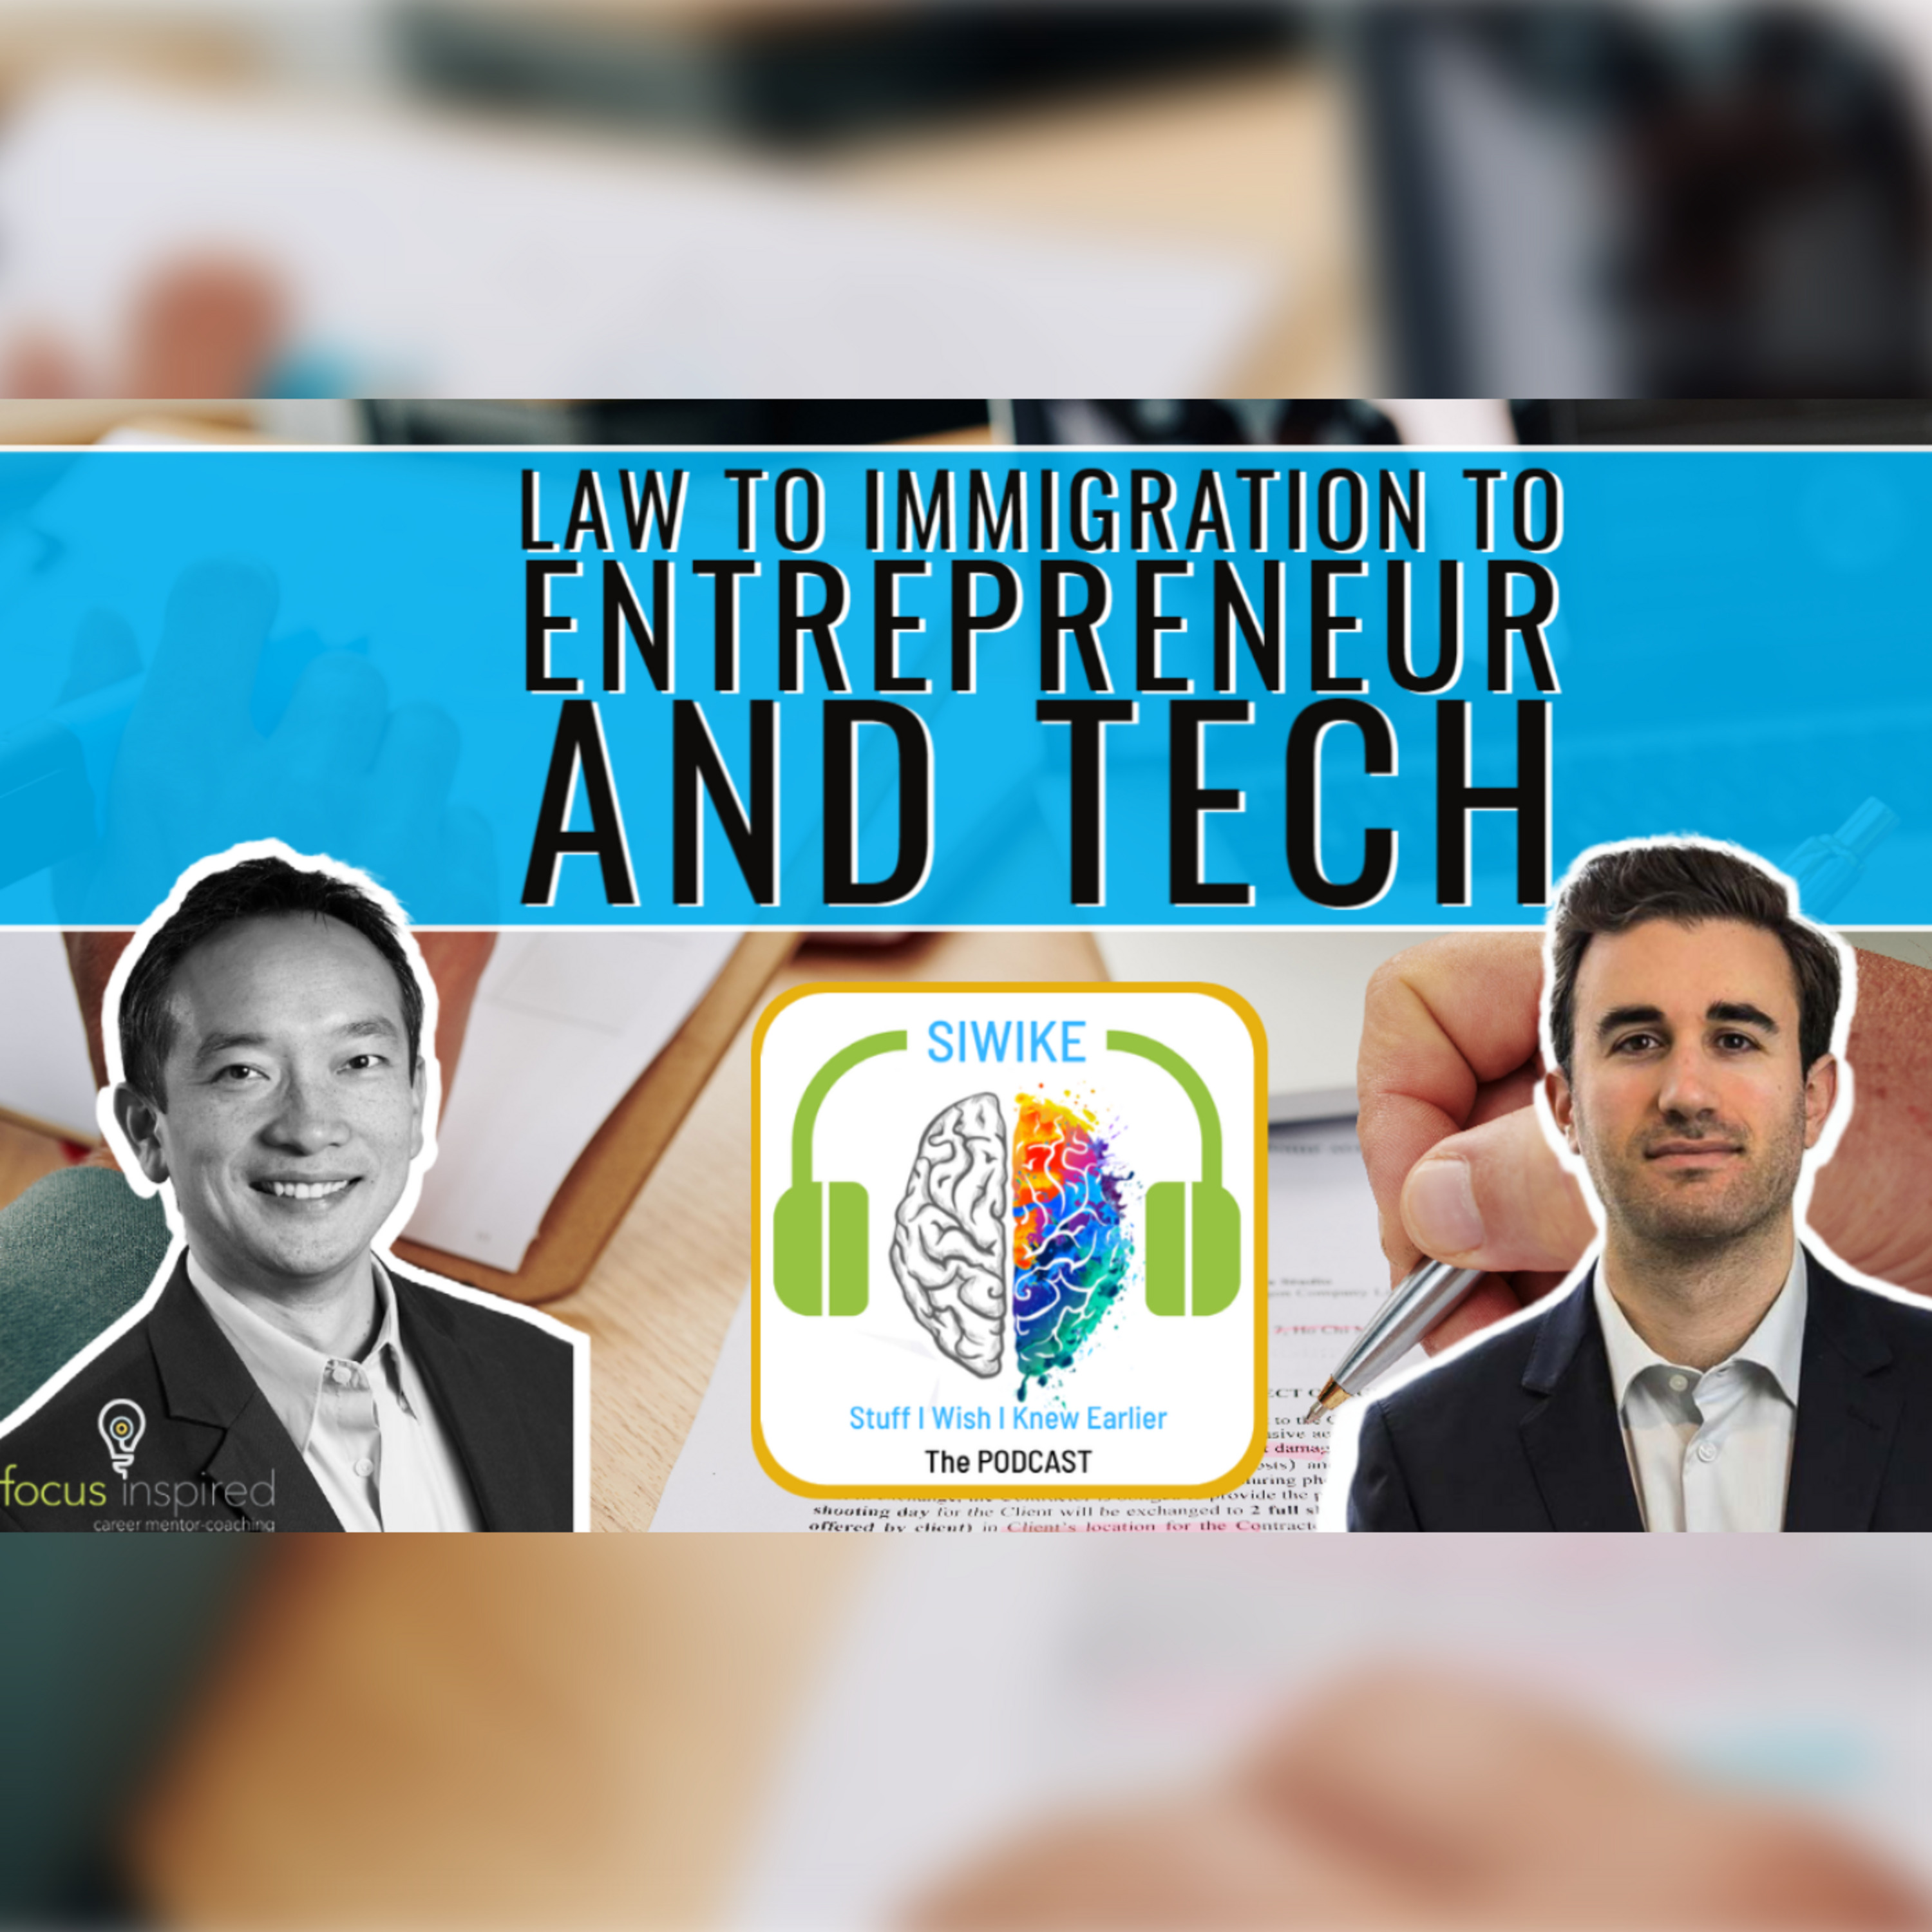 Law to immigration to entrepreneur and tech with Josh Schachnow SIWIKE Podcast (JoshS-001)